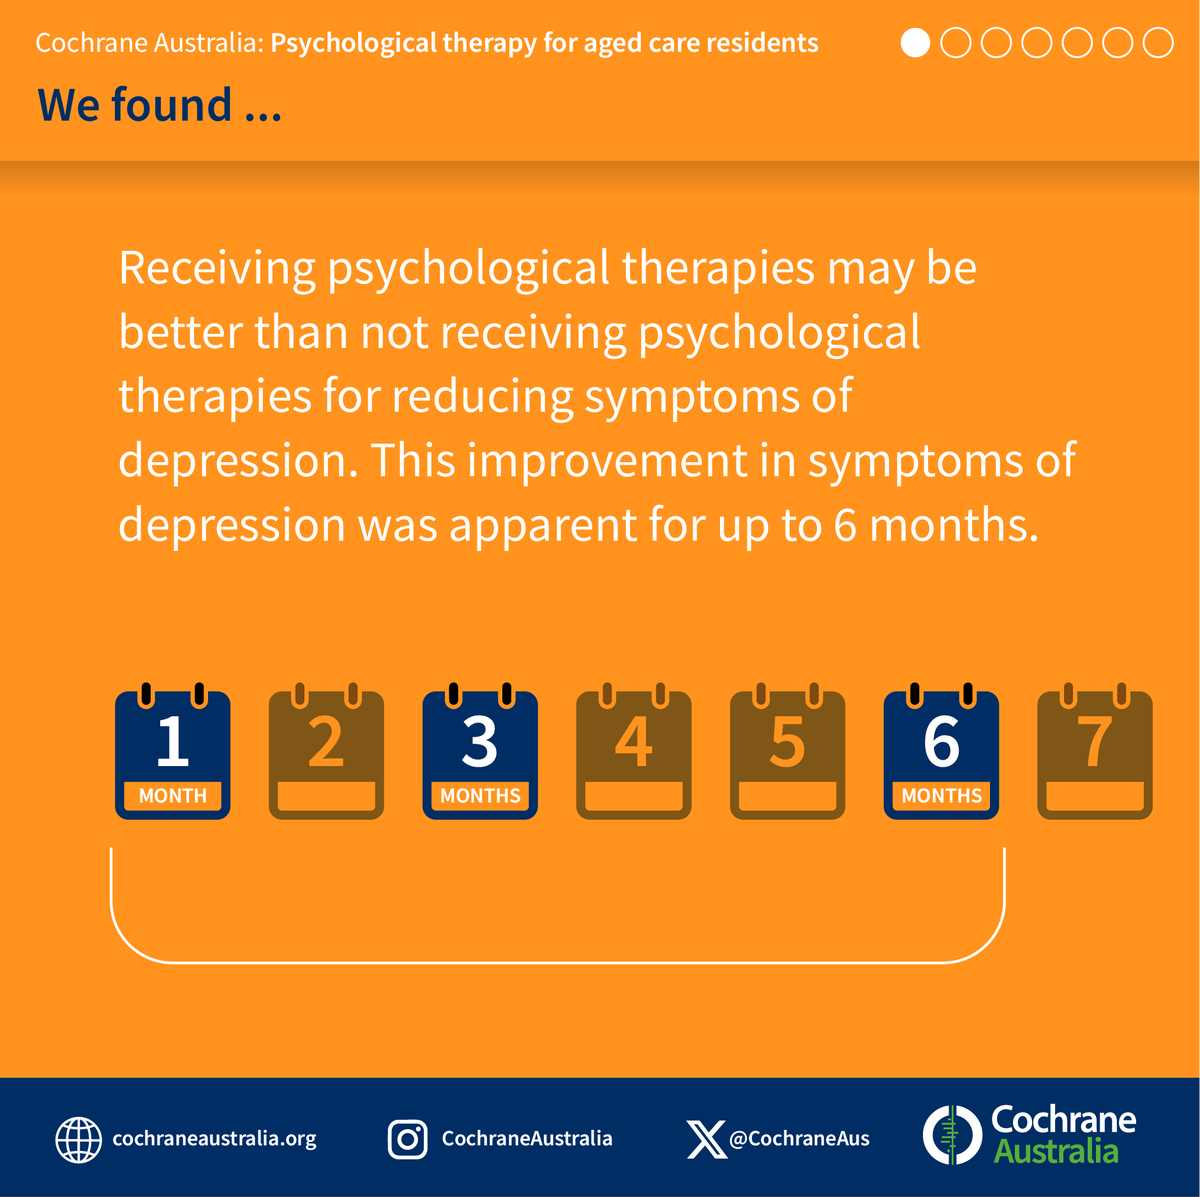 New @CochraneLibrary review finds promising evidence on the benefits of psychological #therapy for aged care residents – one of the highest risk groups for #depression. 📚 Read the full article: bit.ly/3PxO6NC and #Cochranereview: bit.ly/4aqkH07